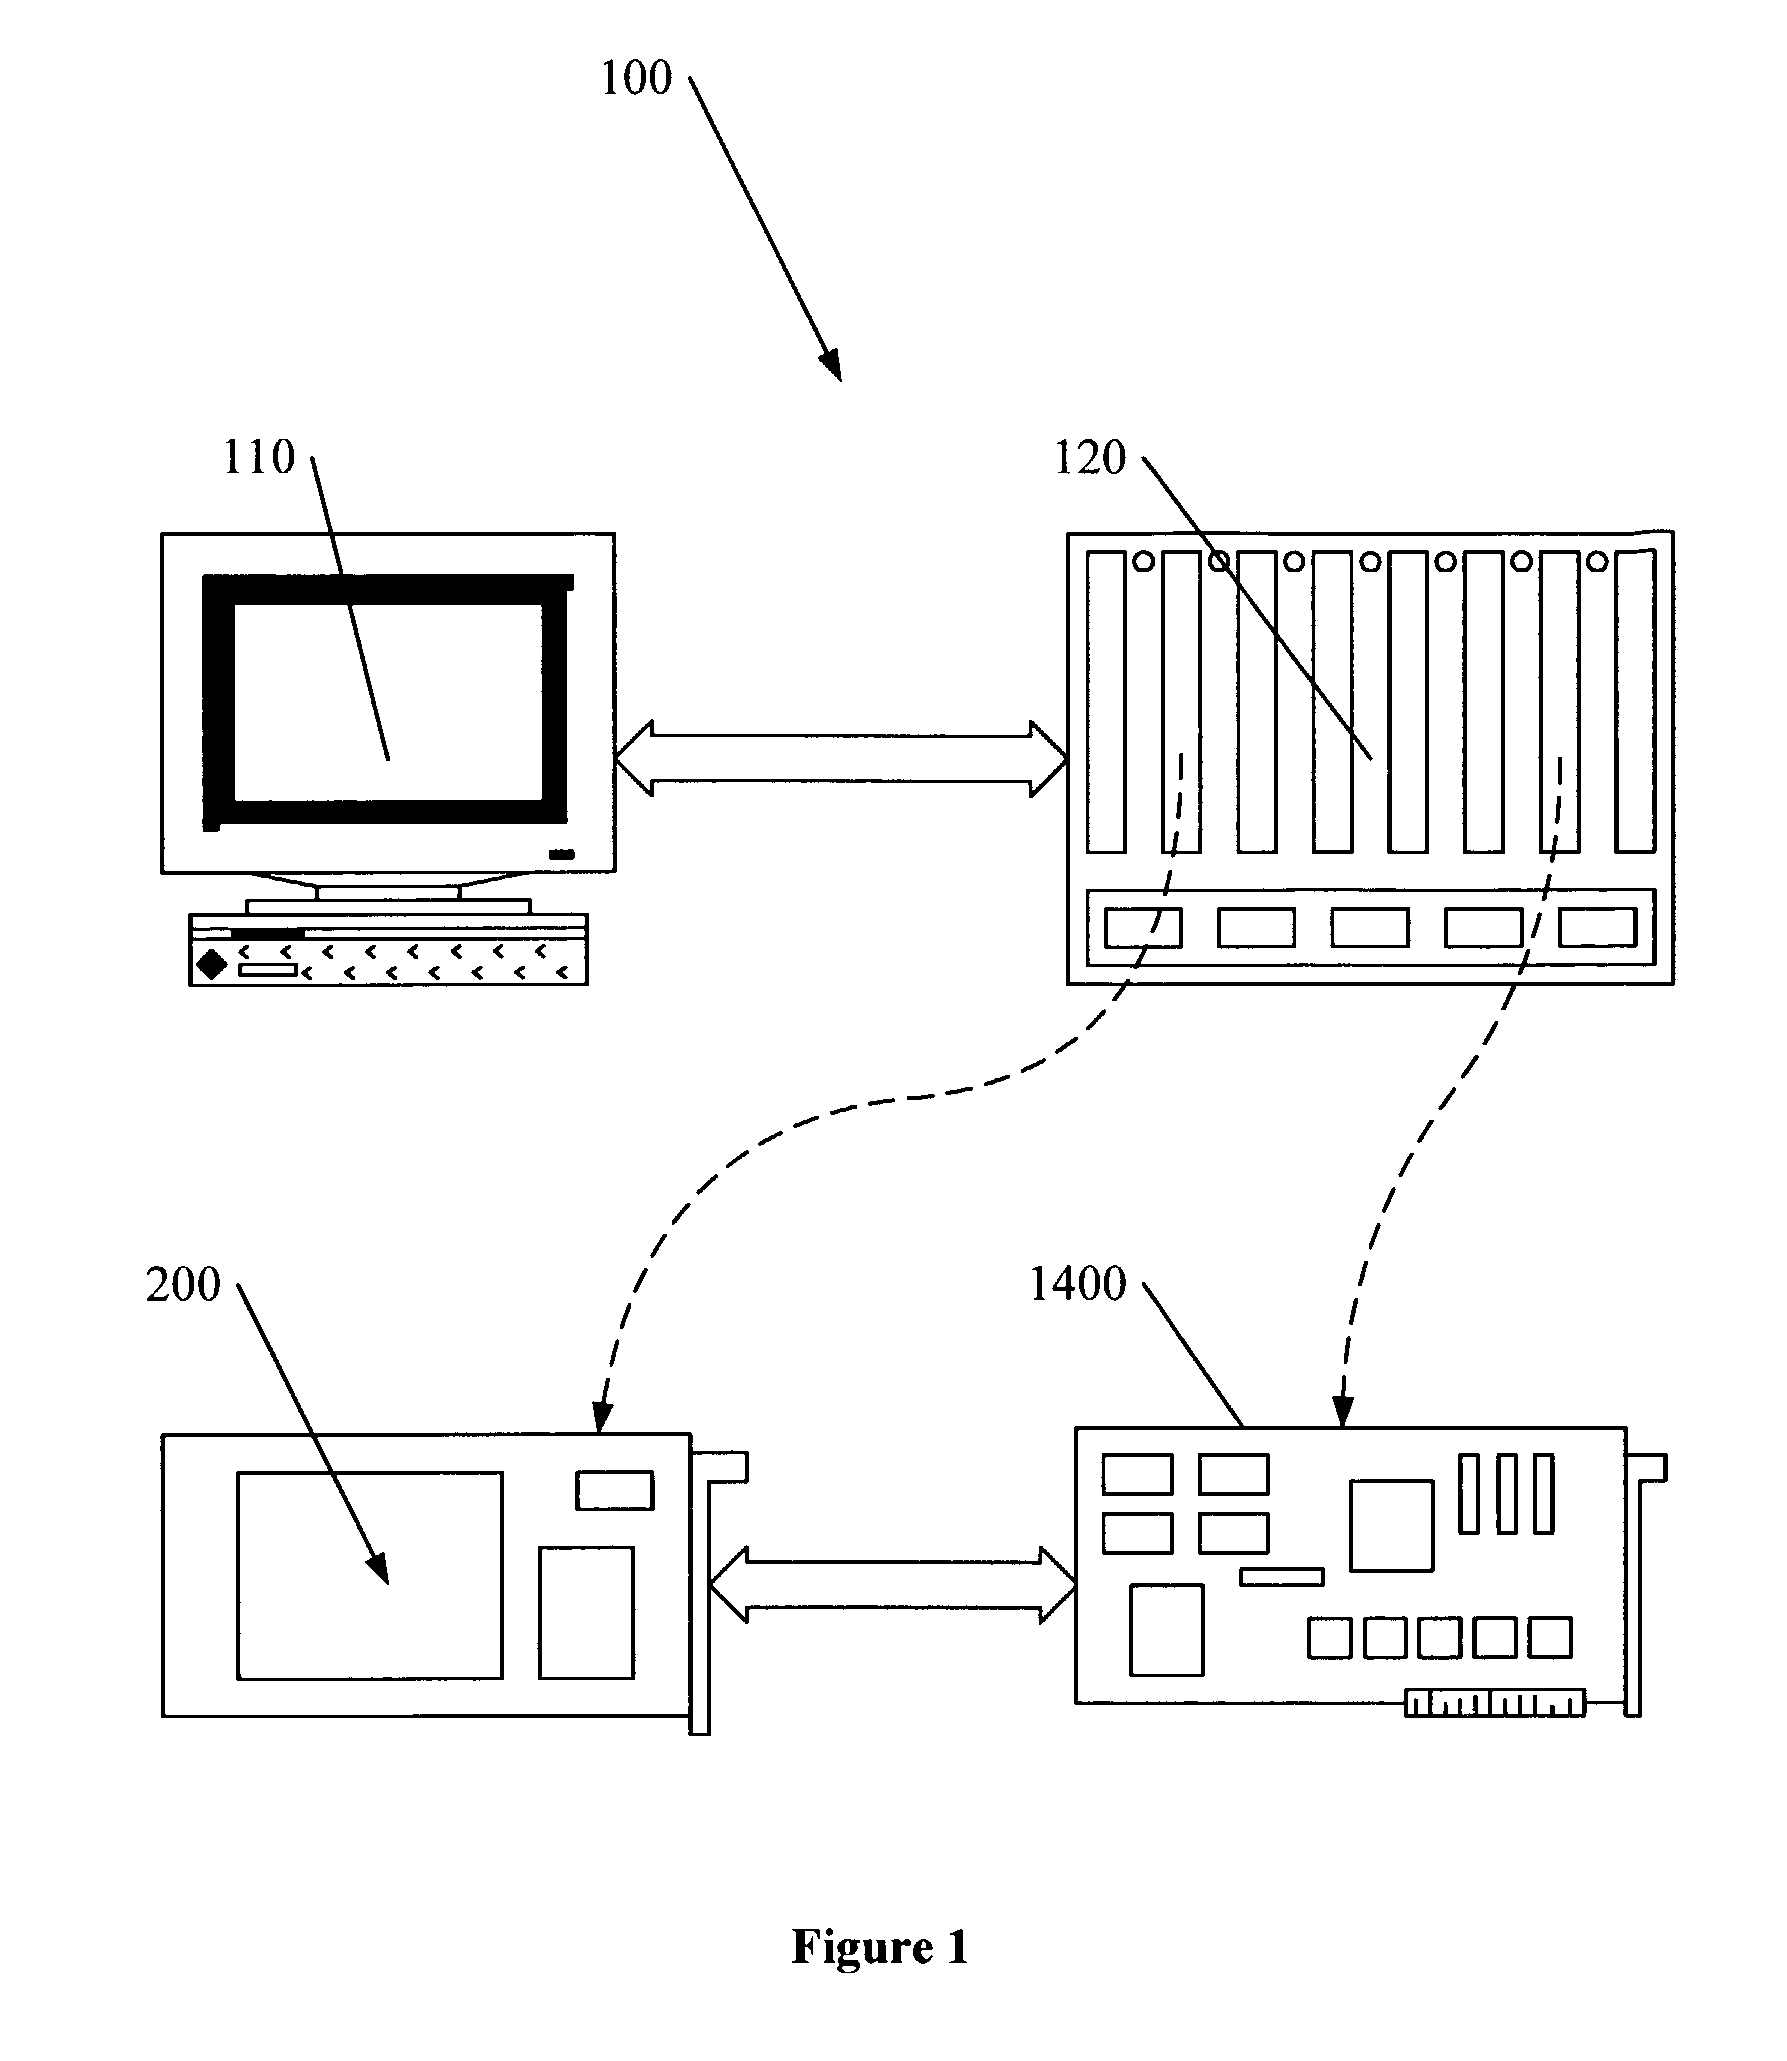 Simultaneous real-time trace and debug for multiple processing core systems on a chip